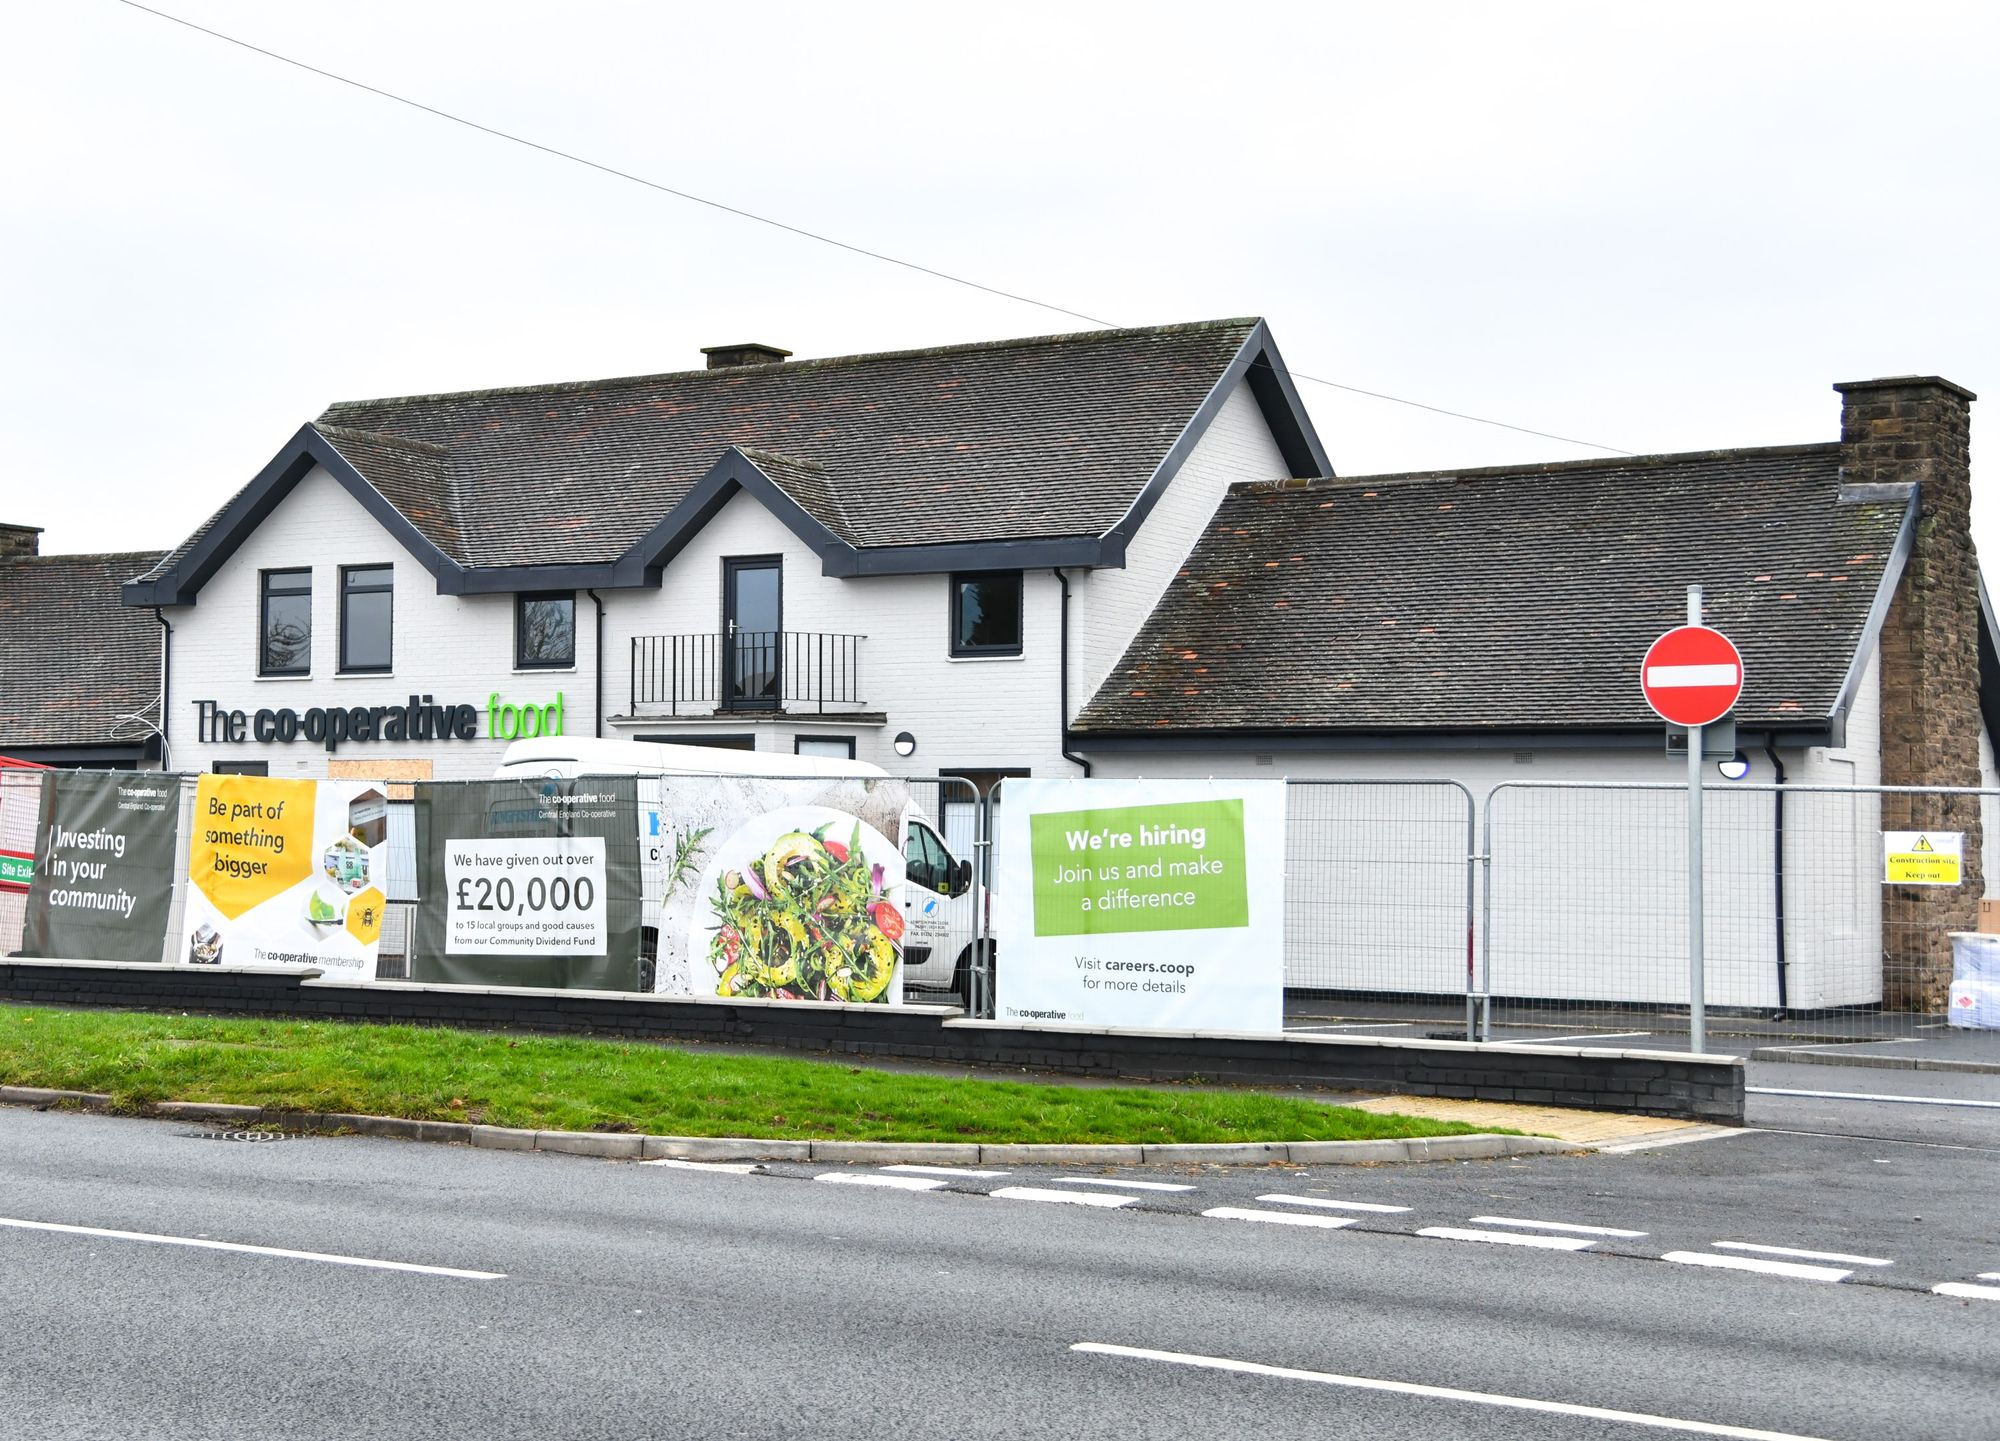 Jobs on offer at new community food store coming soon to Yorkshire village